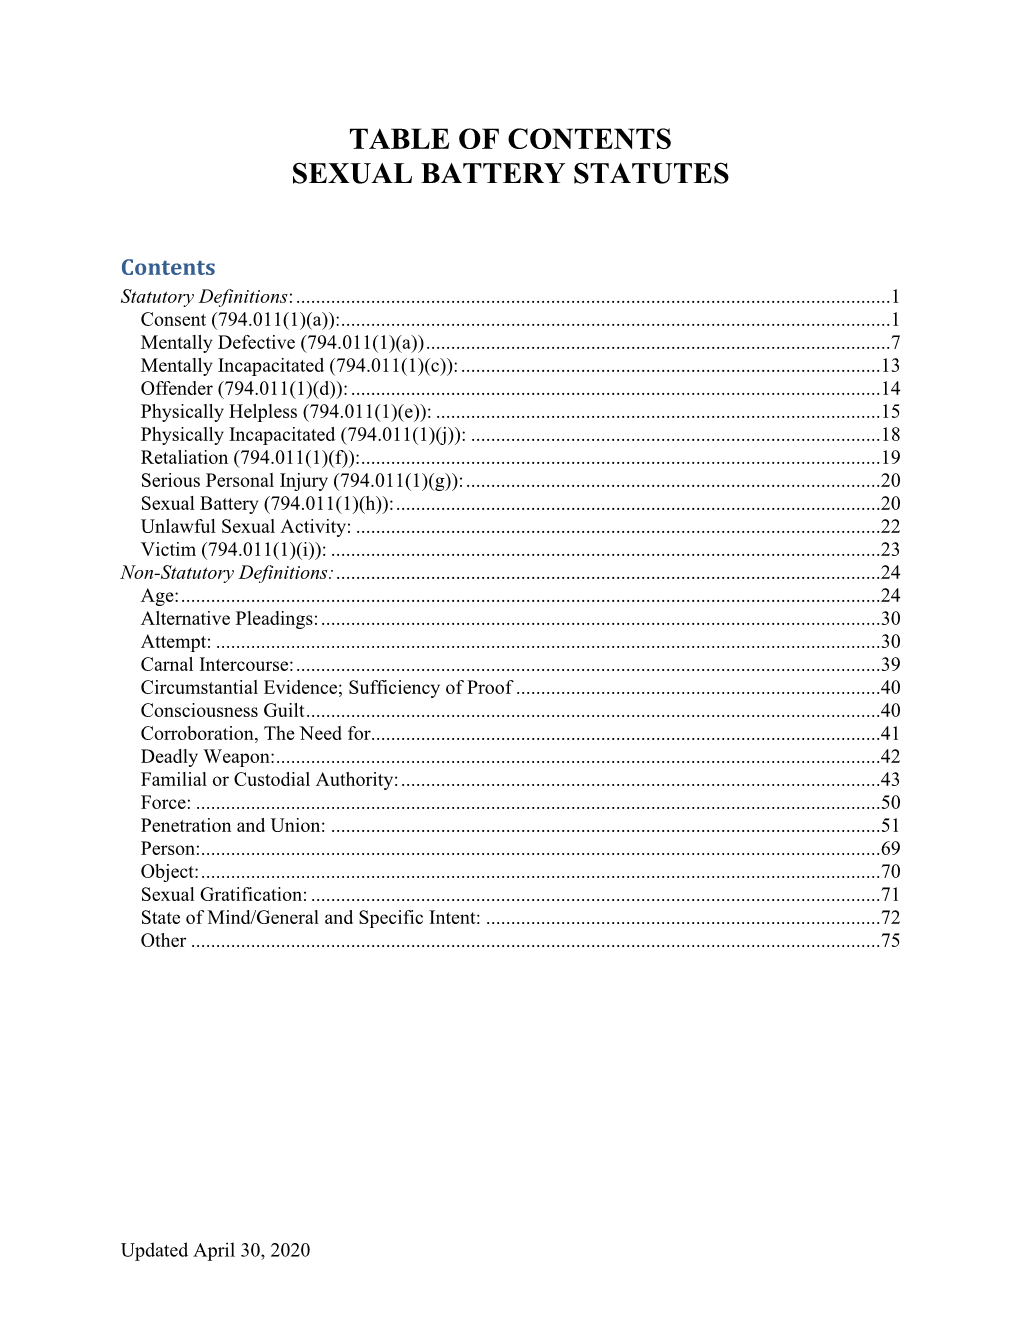 Table of Contents Sexual Battery Statutes